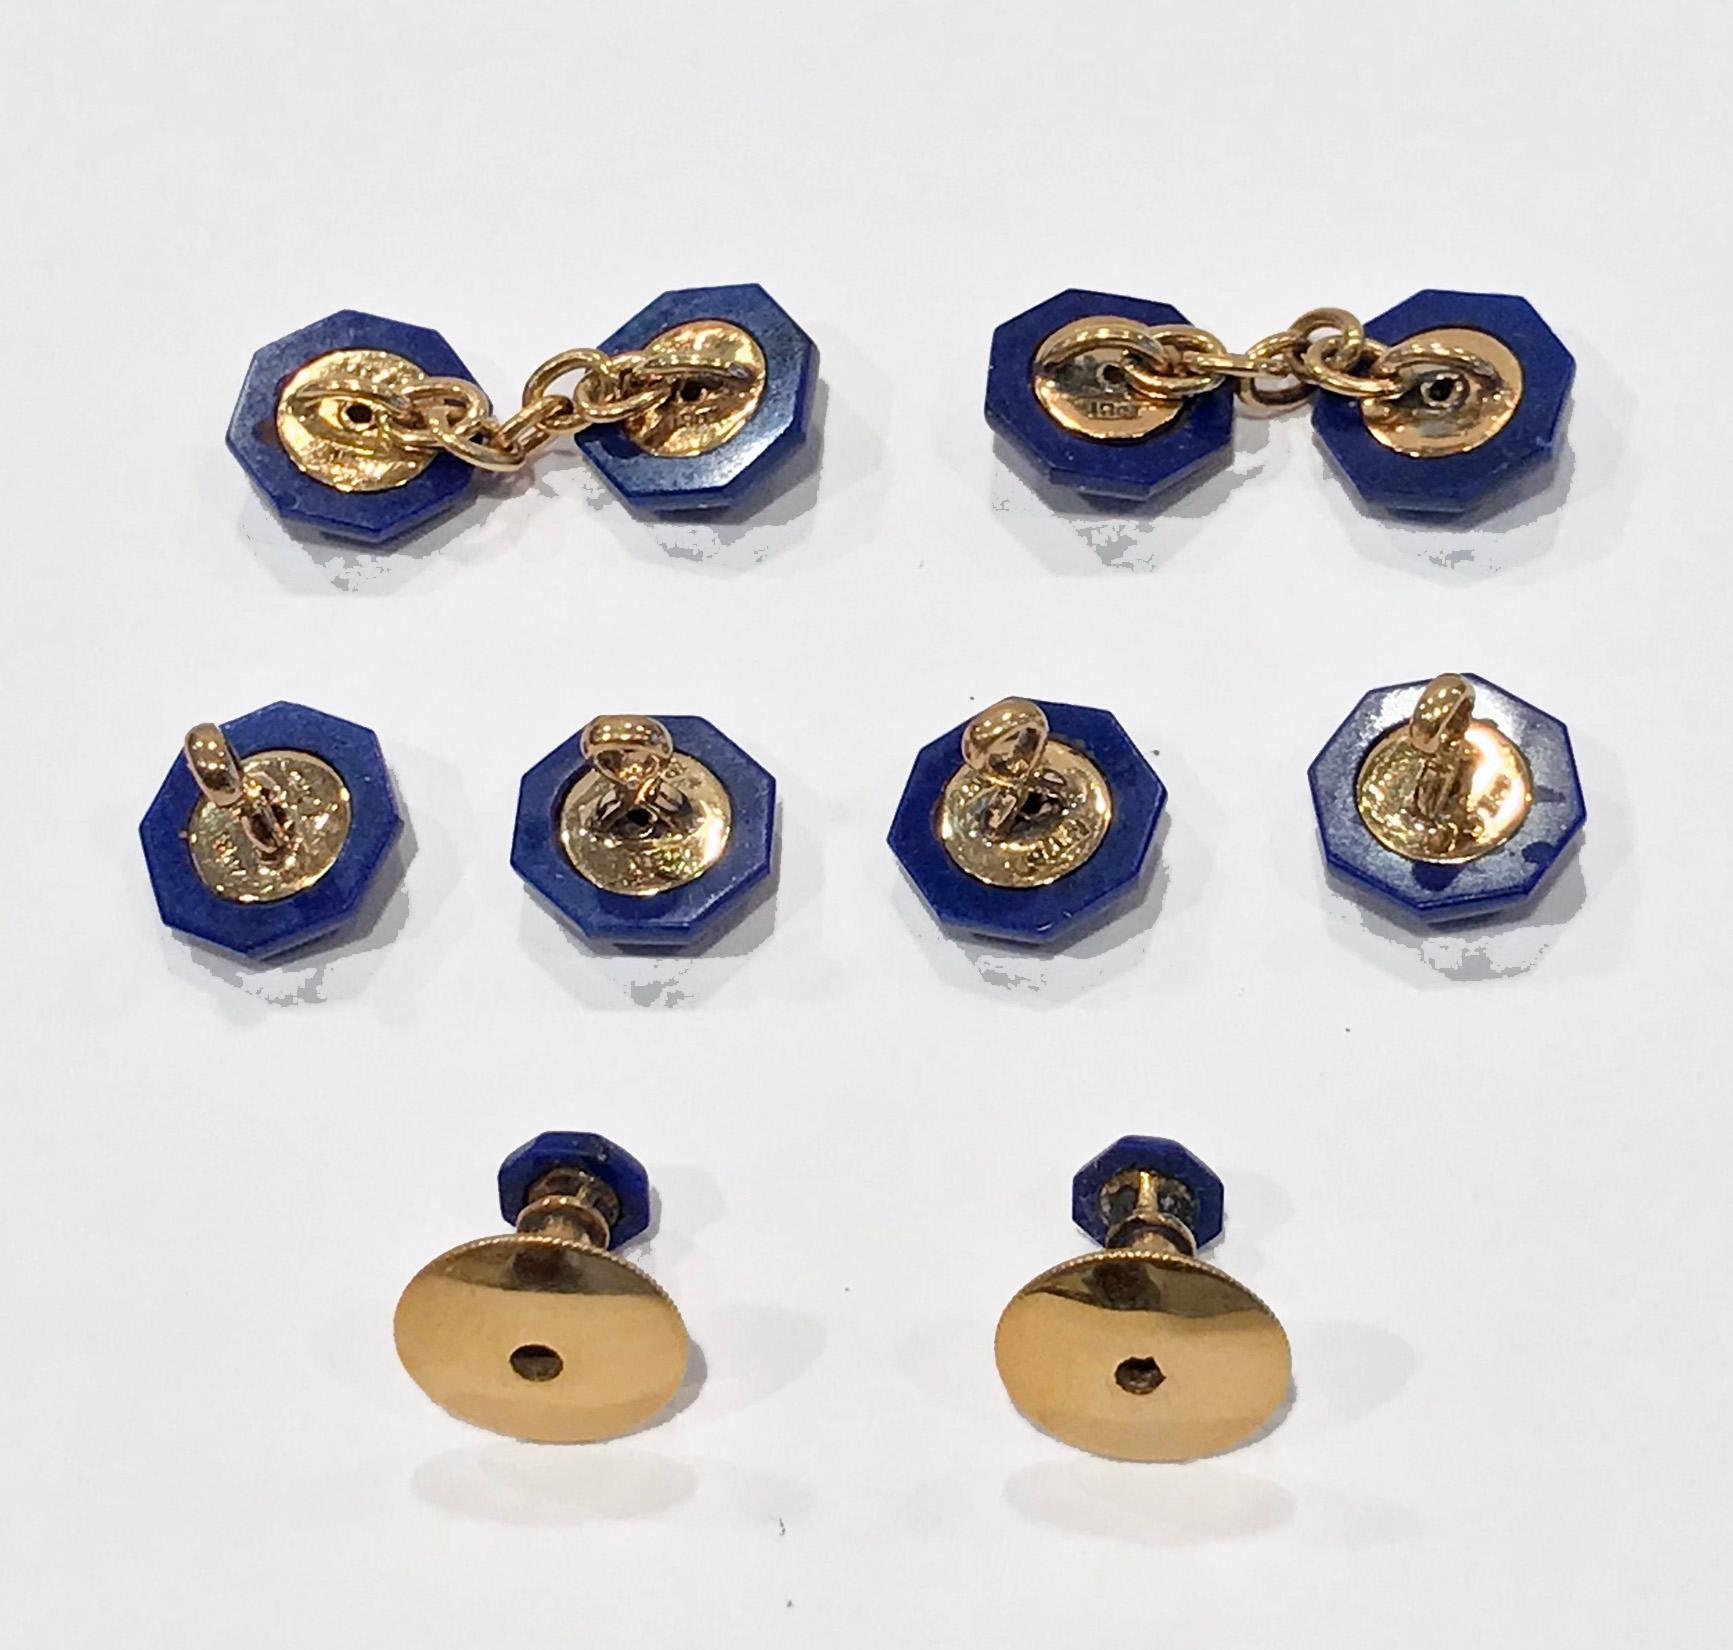 Set of 18K, Platinum, Lapis and Diamond gold Studs and links Tuxedo Set in fitted box, English C.1920. The studs of octagonal shape, each milligrain set in the center with a round facetted diamond and lapis surround, the Cufflinks with chain link